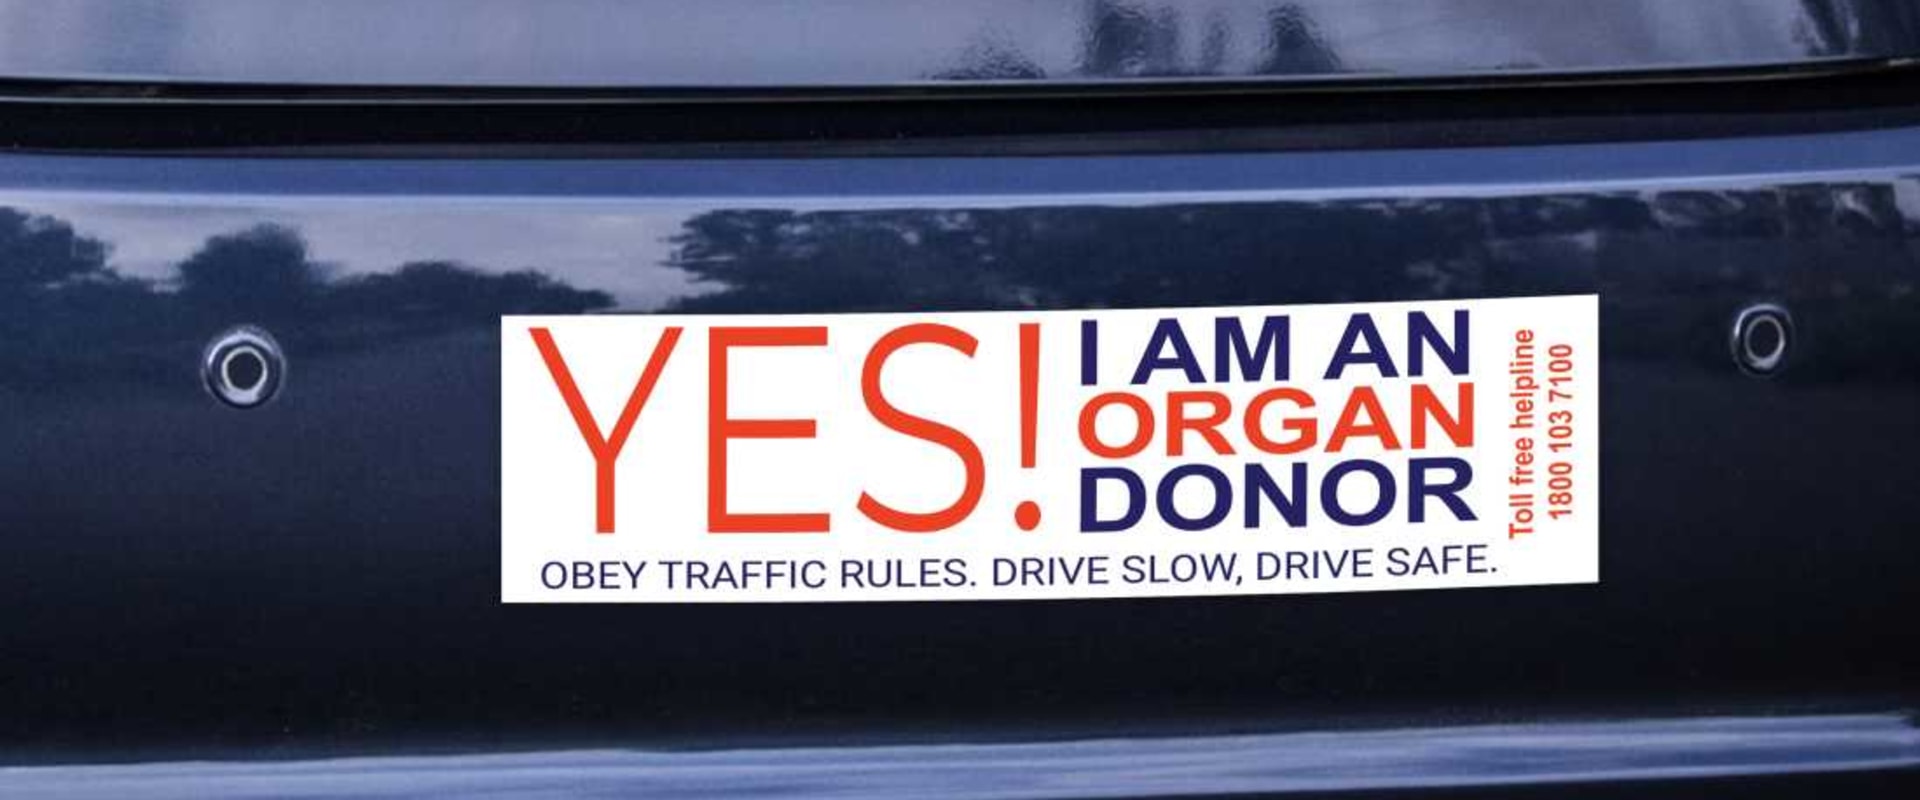 Everything You Need to Know About Buying Bumper Stickers Online